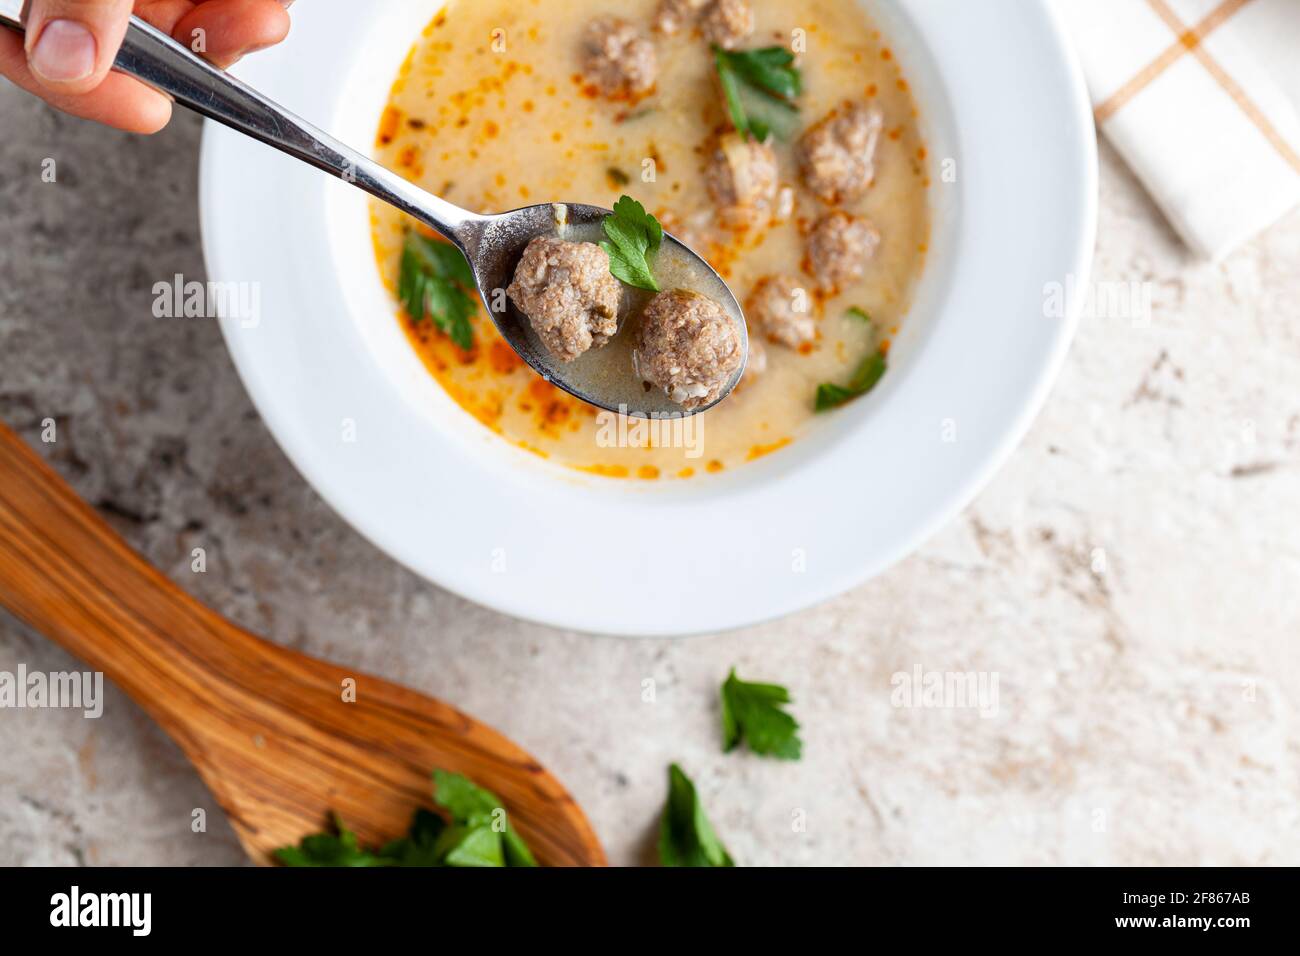 Turkish meatball soup (Terbiyeli kofte corbasi ) is a popular dish in Turkey where meatballs made with ground beef and rice are cooked in broth with e Stock Photo